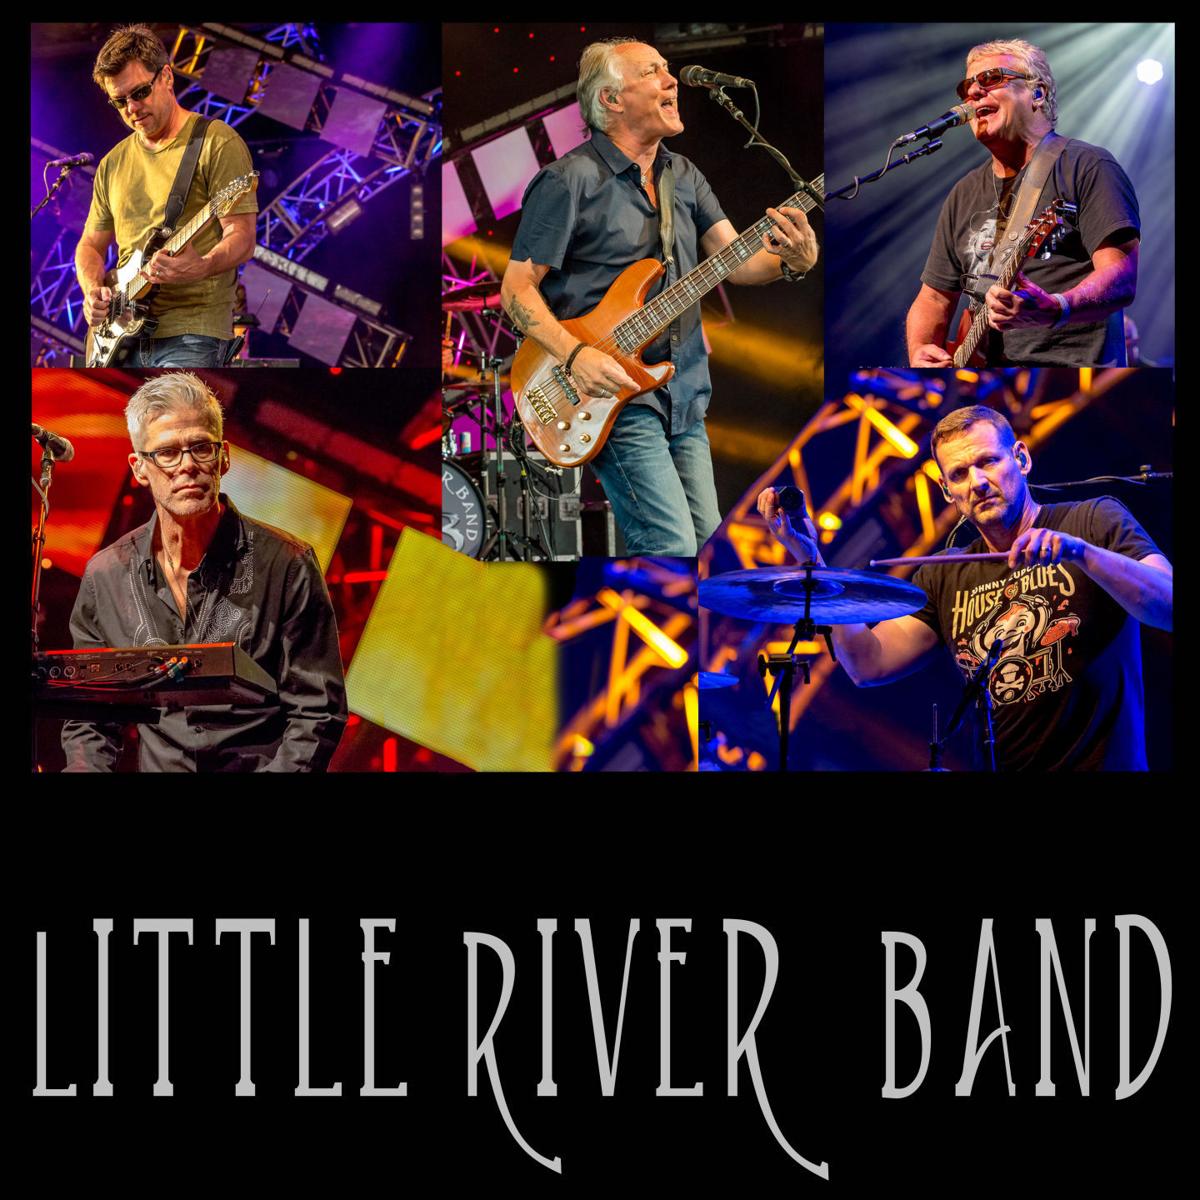 Little River Band brings hits to Rialto gig Business News